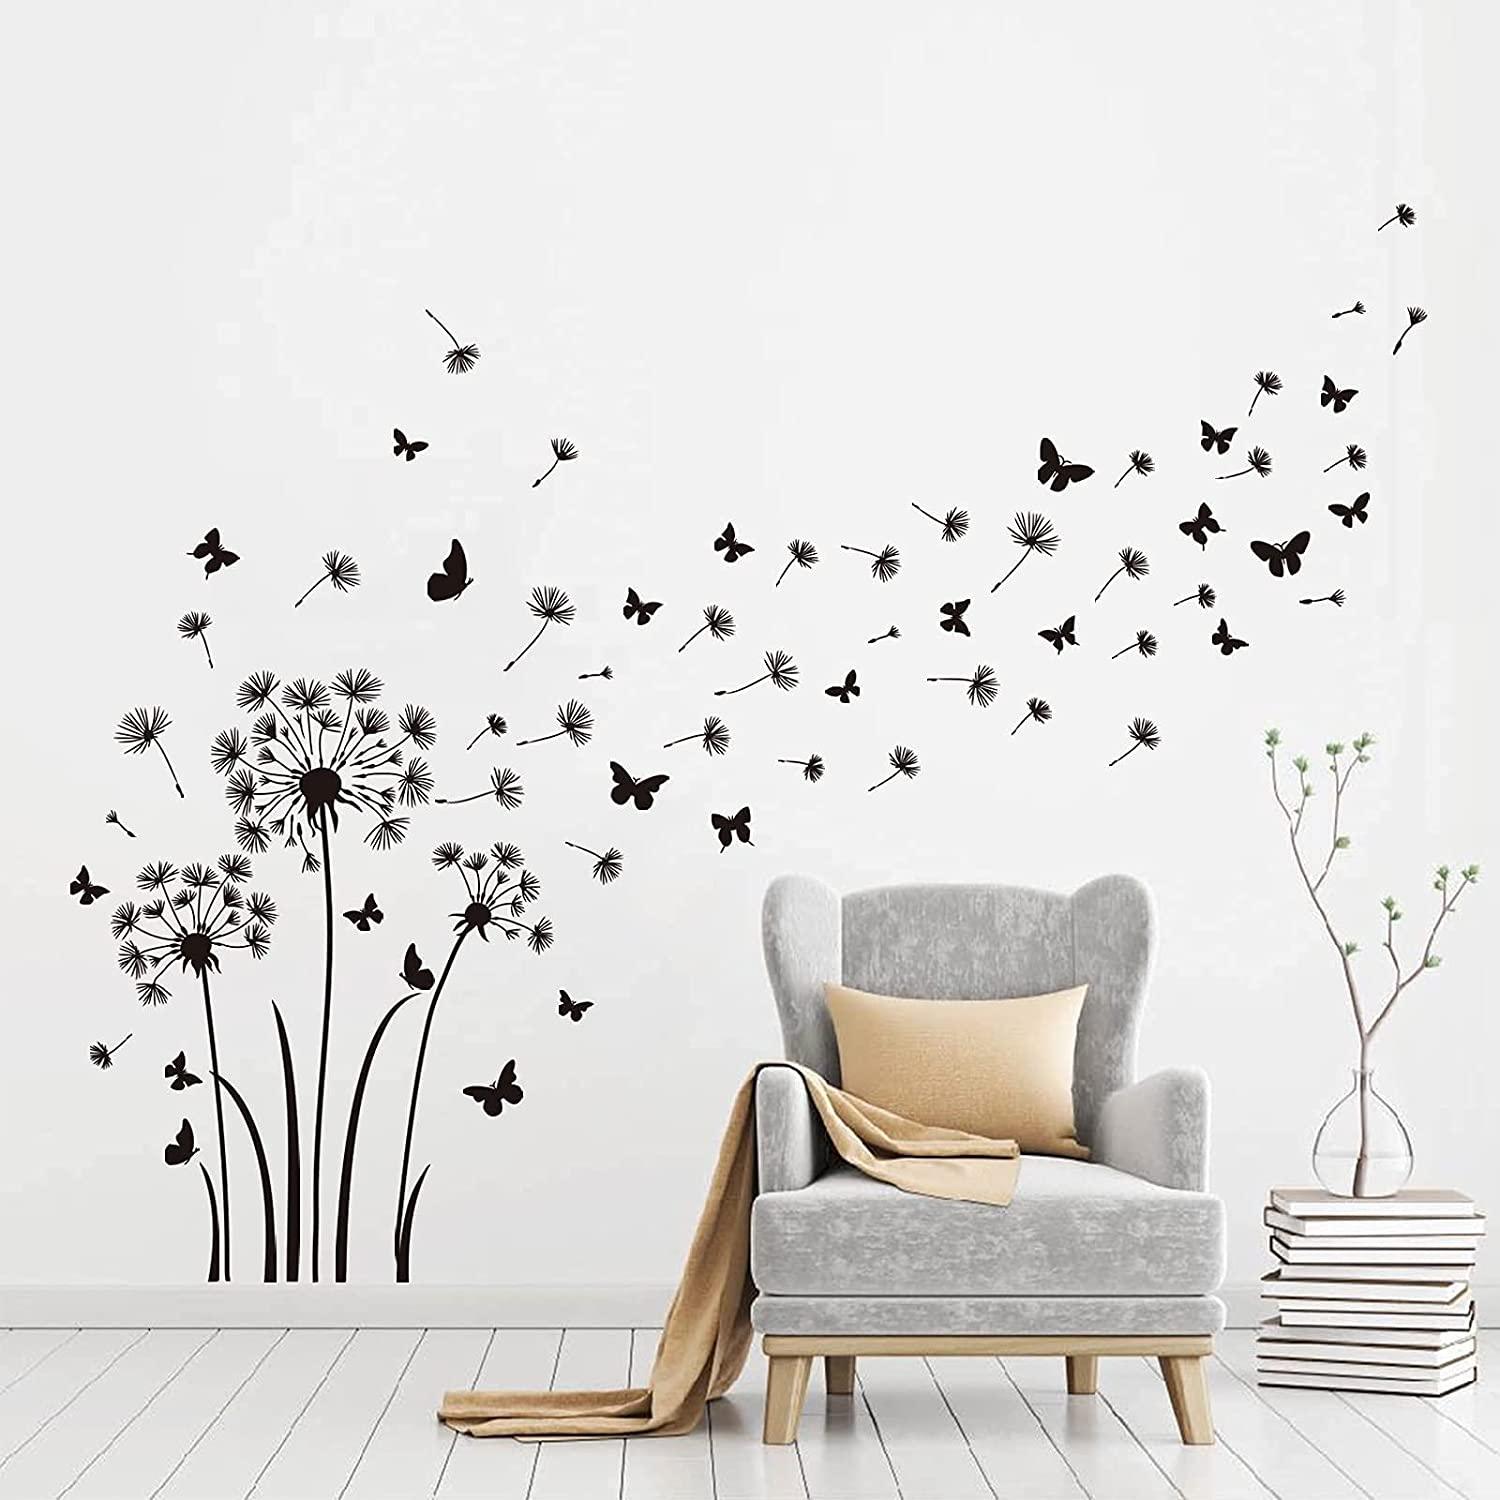 How to Choose Wall Decals - HauSweet